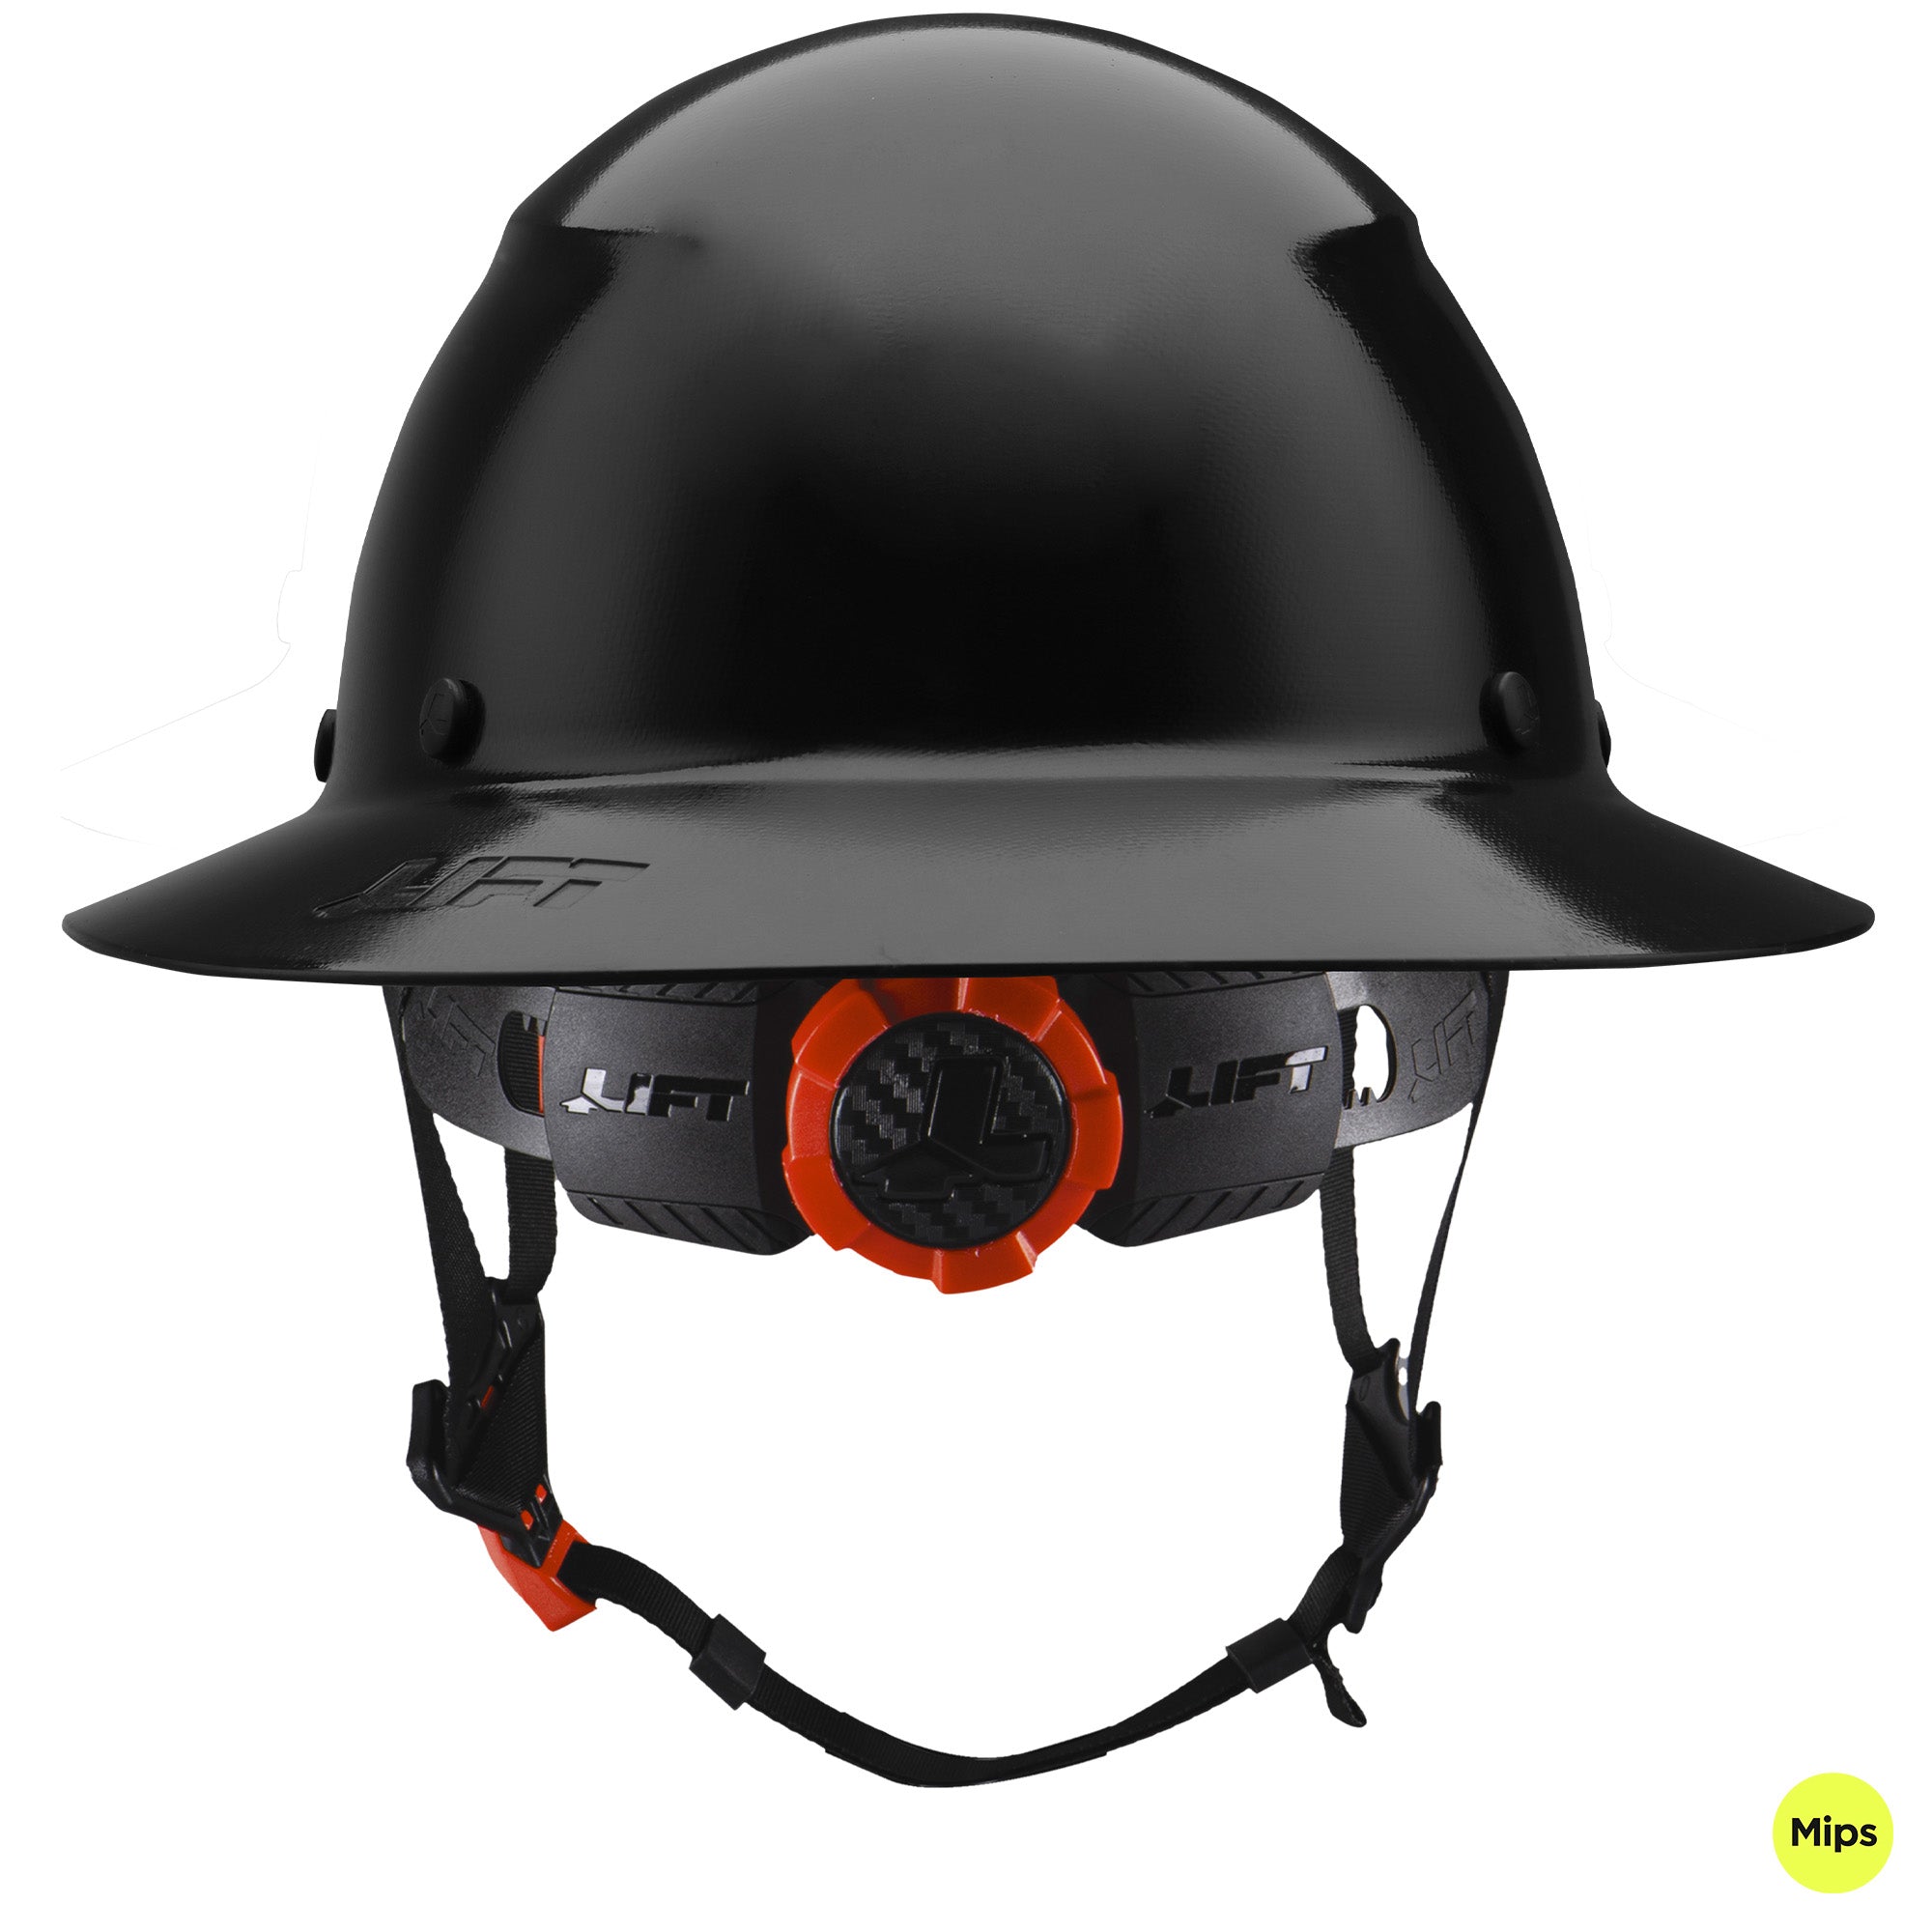 DAX Full Brim Hard Hat with Mips - Black - LIFT Safety